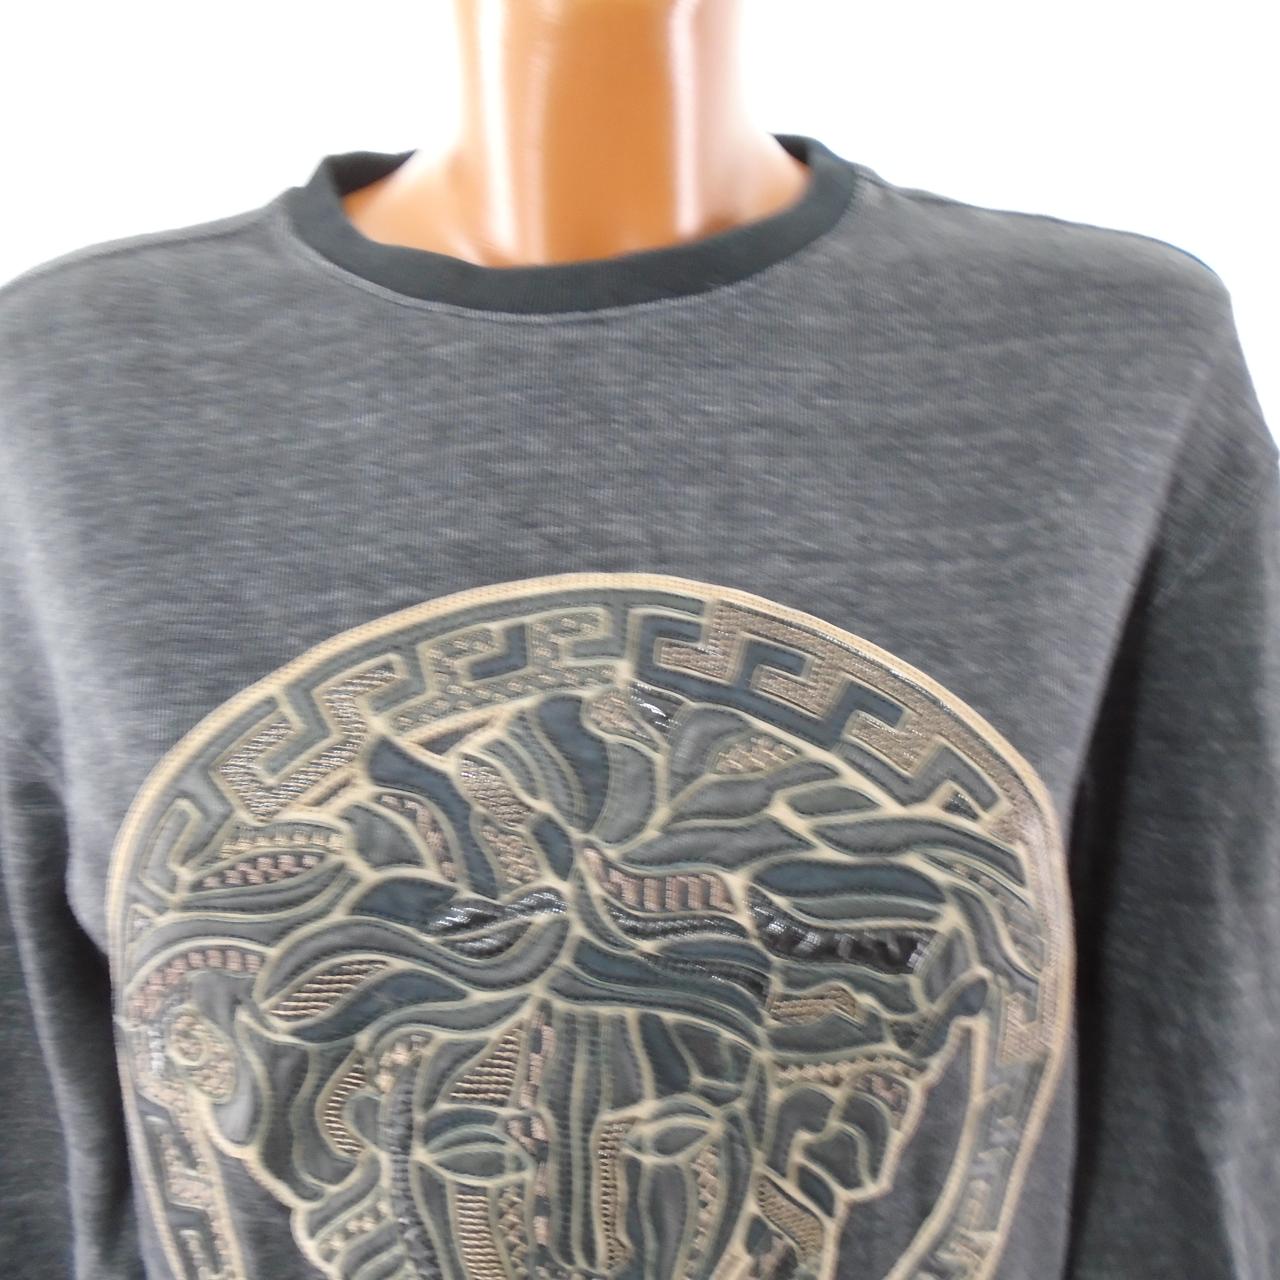 Women's Sweater Versace Jeans. Grey. S. Used. Good